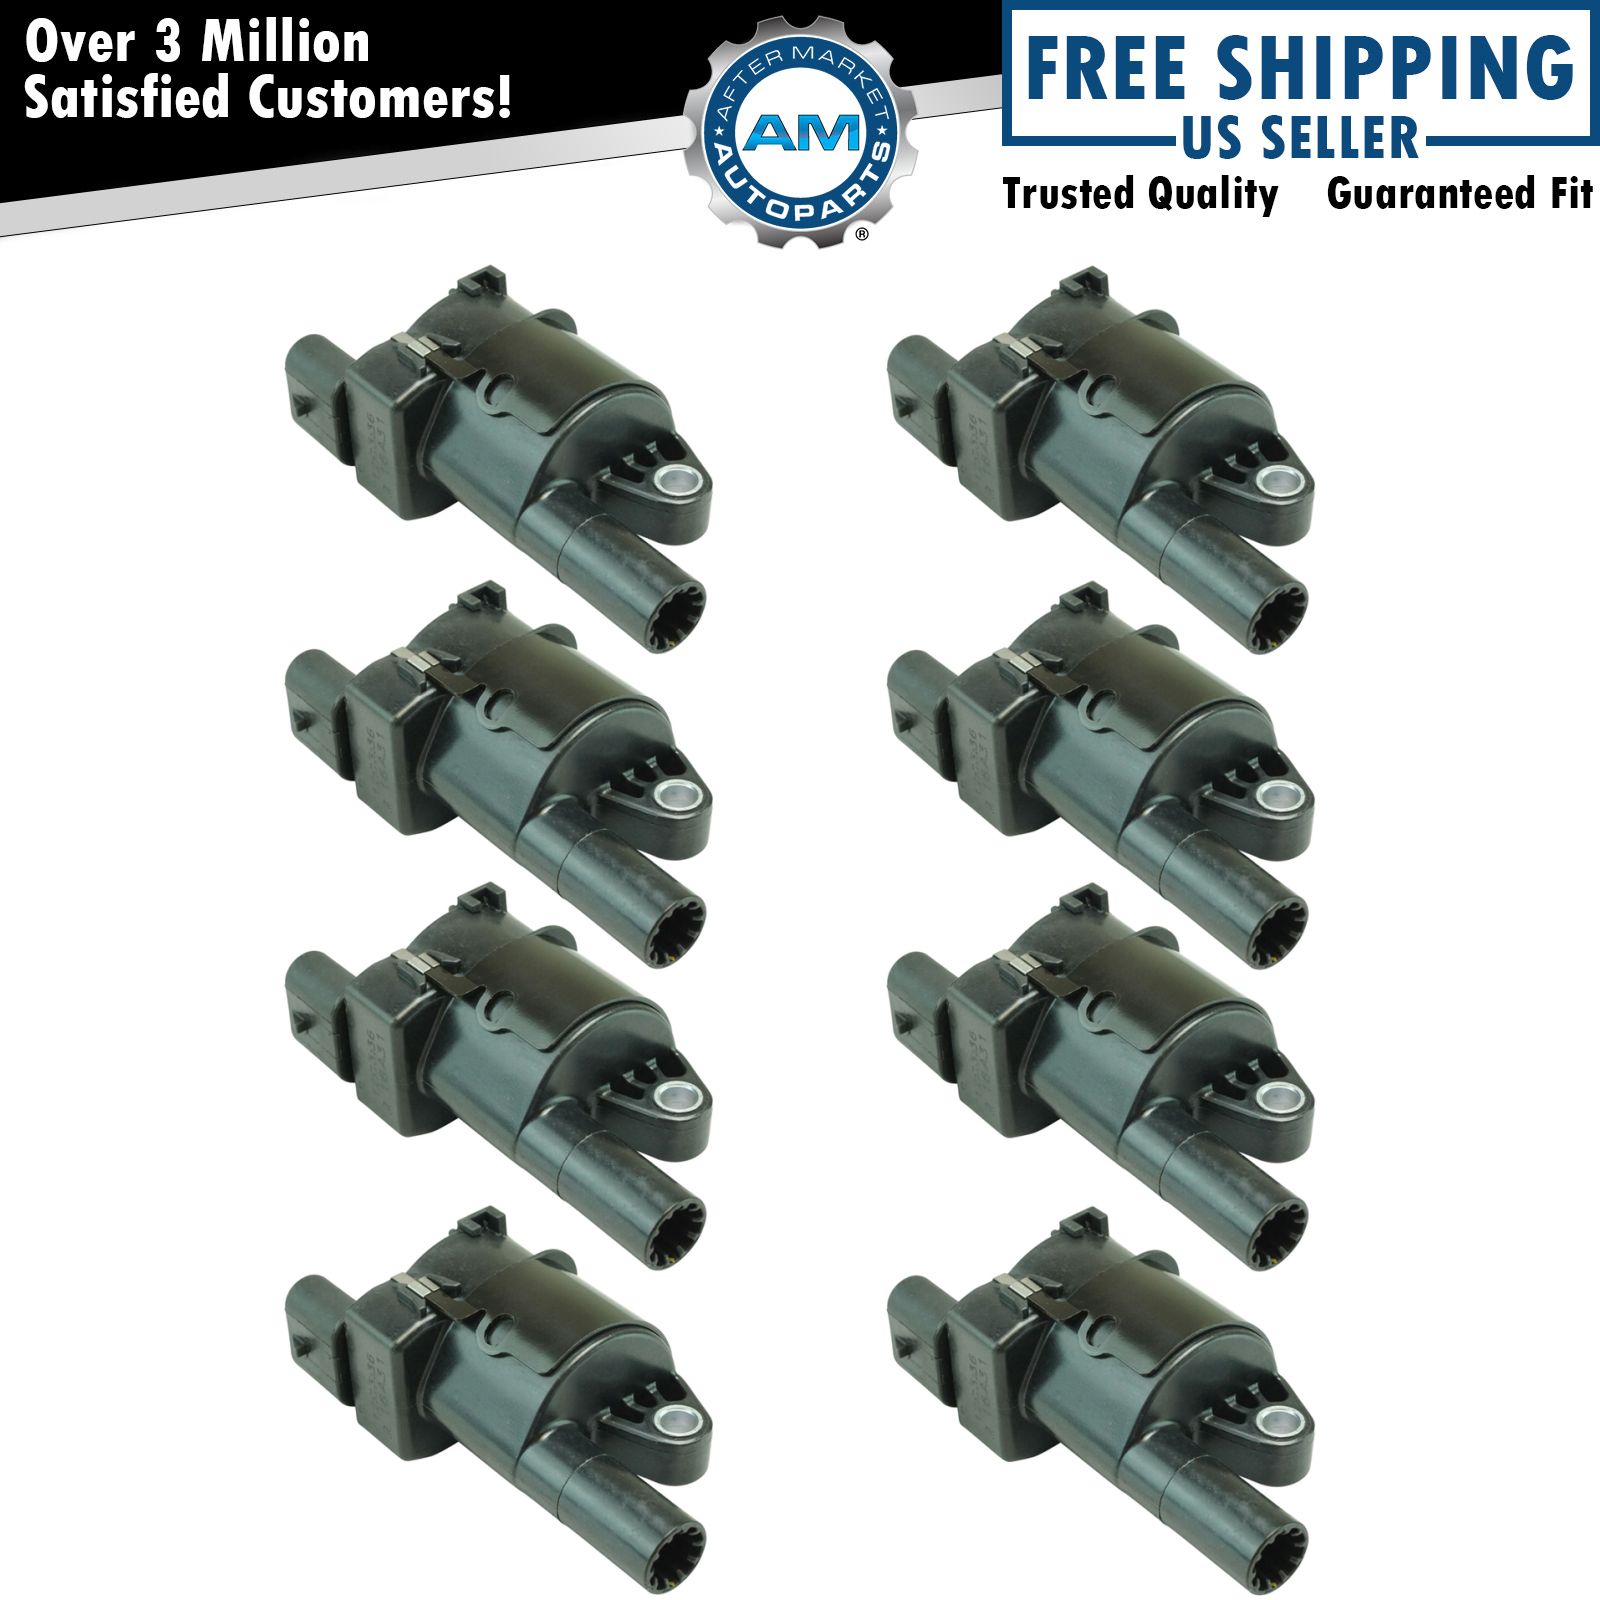 Delphi GN10165 Round Ignition Coil Set of 8 for Chevy GMC Cadillac Pontiac Buick